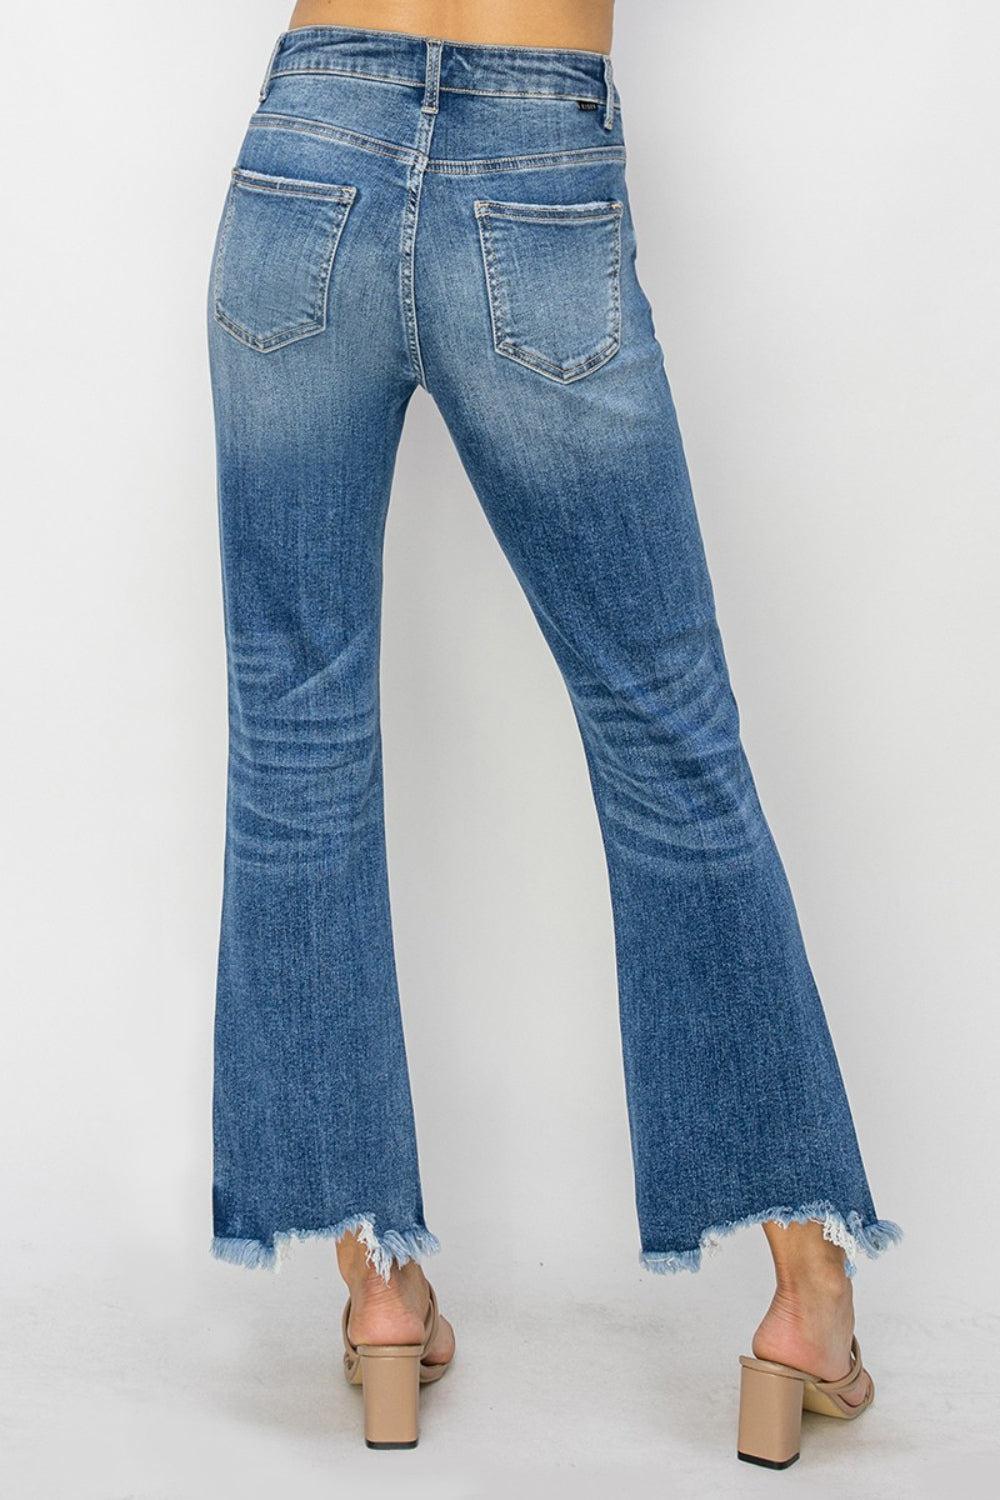 a woman wearing a pair of high rise jeans